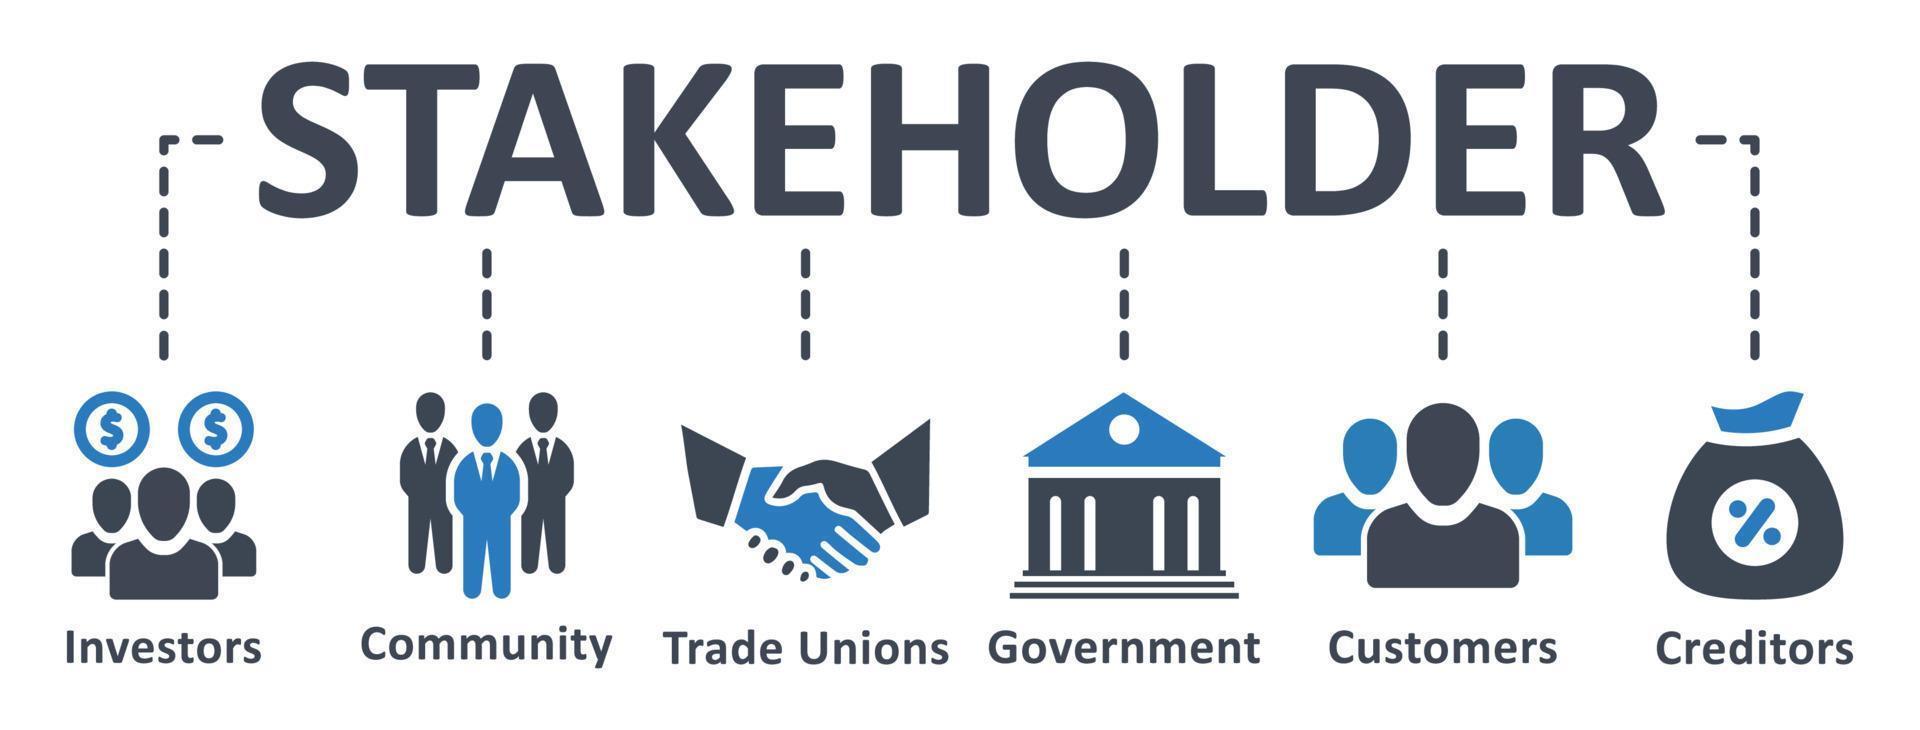 Stakeholder icon - vector illustration . Stakeholder, investor, government, creditors, trade unions, suppliers, customers, infographic, template, presentation, concept, banner, icon set, icons .